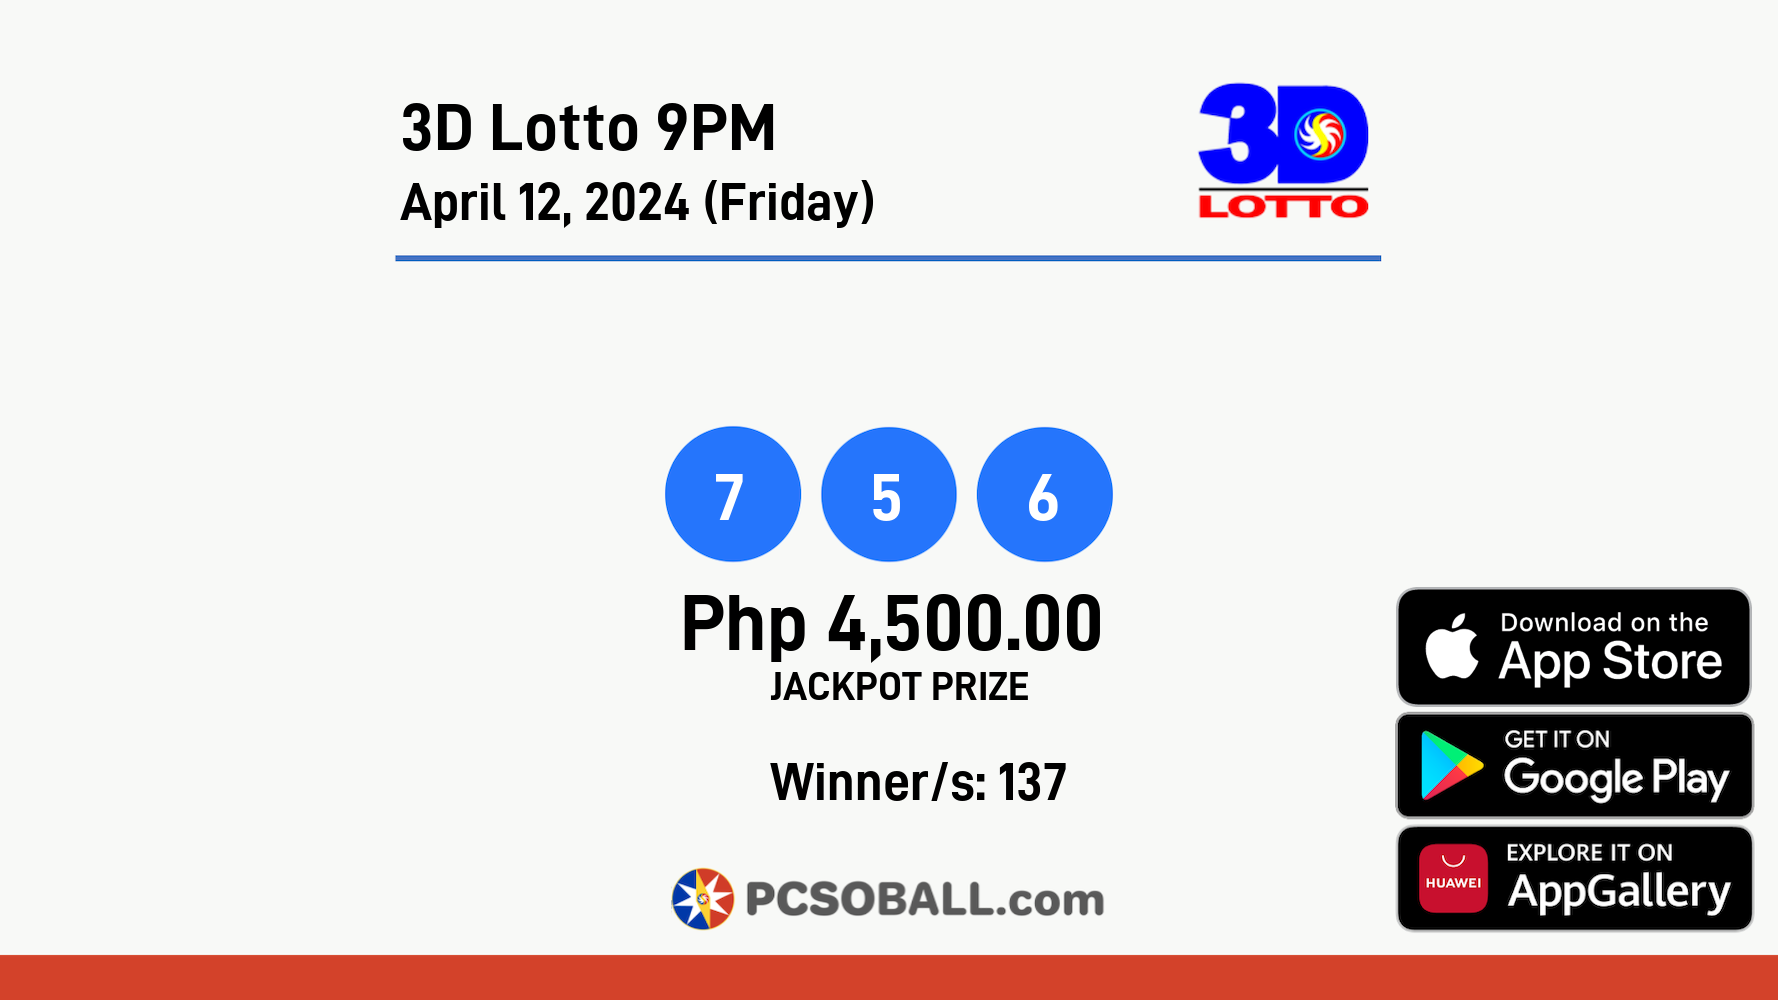 3D Lotto 9PM April 12, 2024 (Friday) Result